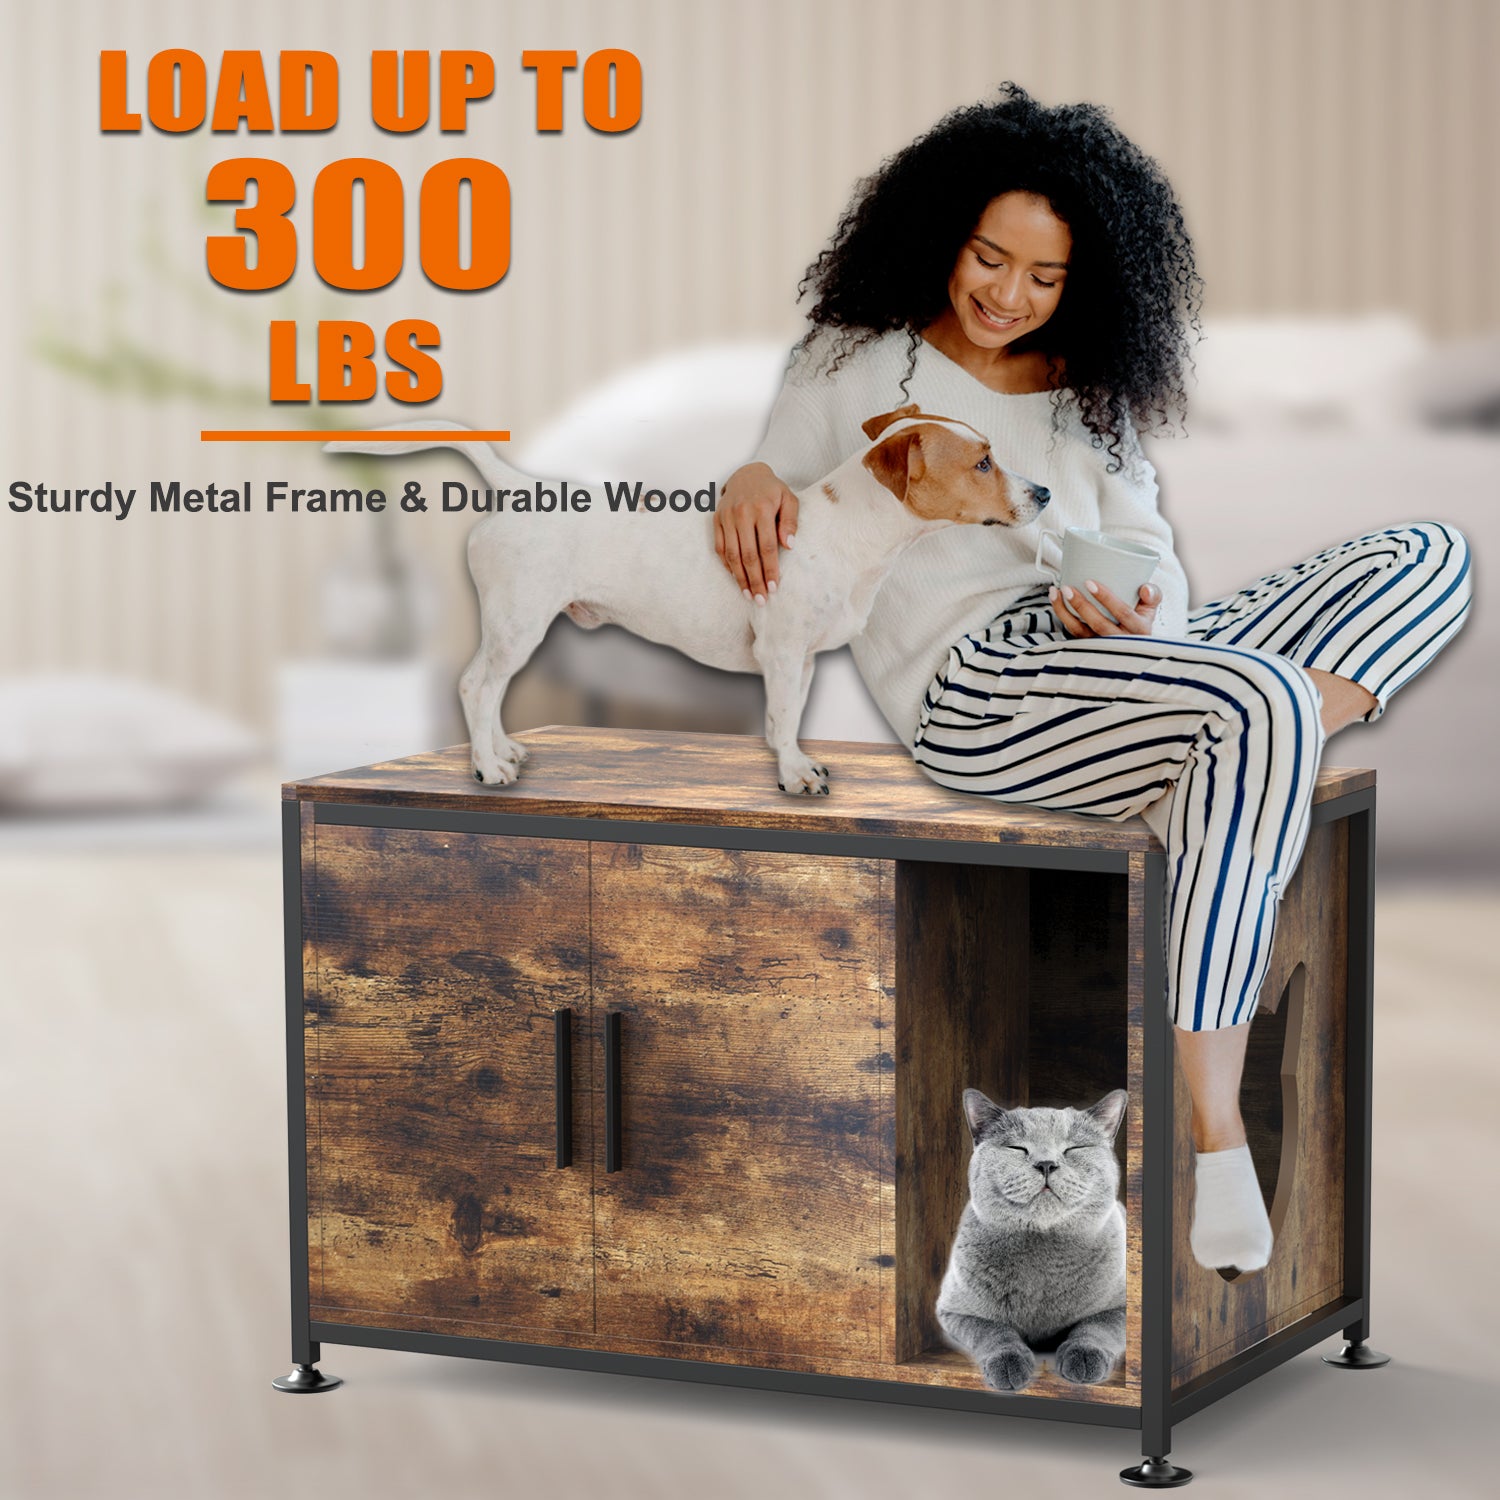 Natureasy Cat Litter Box Furniture Hidden Litterbox Enclosure Top Opening Cat Washroom Storage Bench Sturdy Large Enclosed Decorative Litter Tray Cabinet Side Table Cat House with Door & Entryway